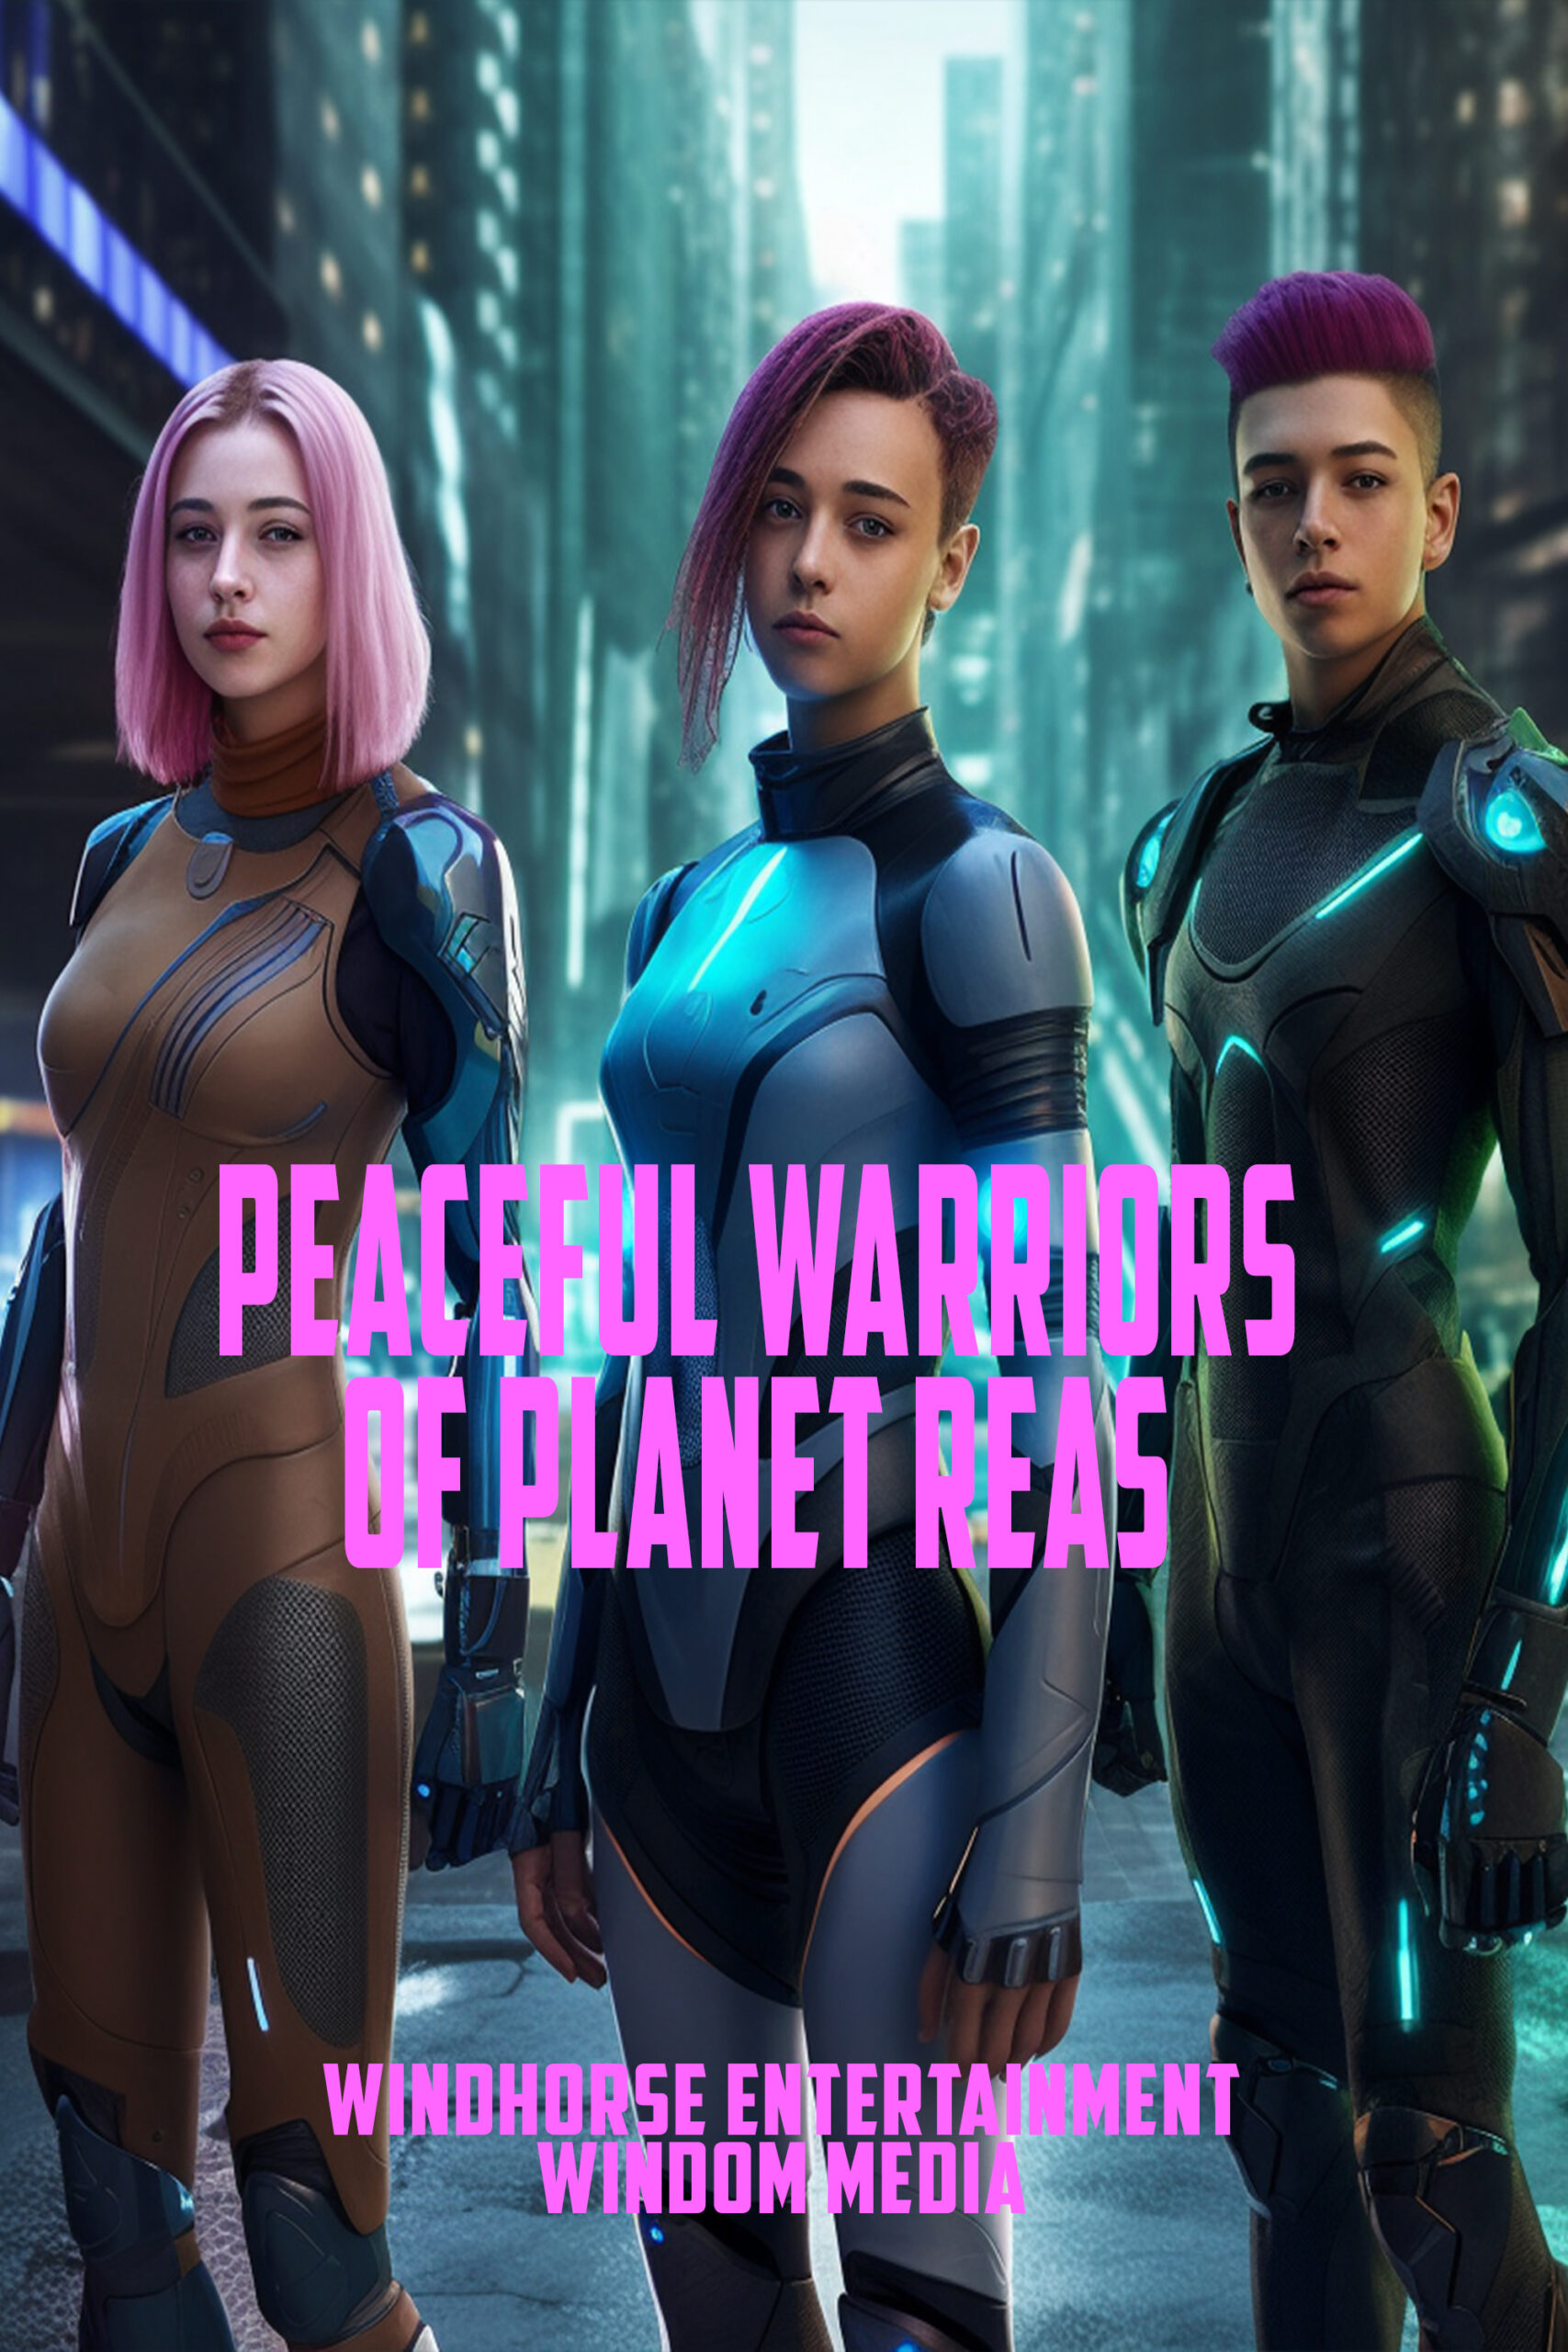 Peaceful Warriors of Planet Reas